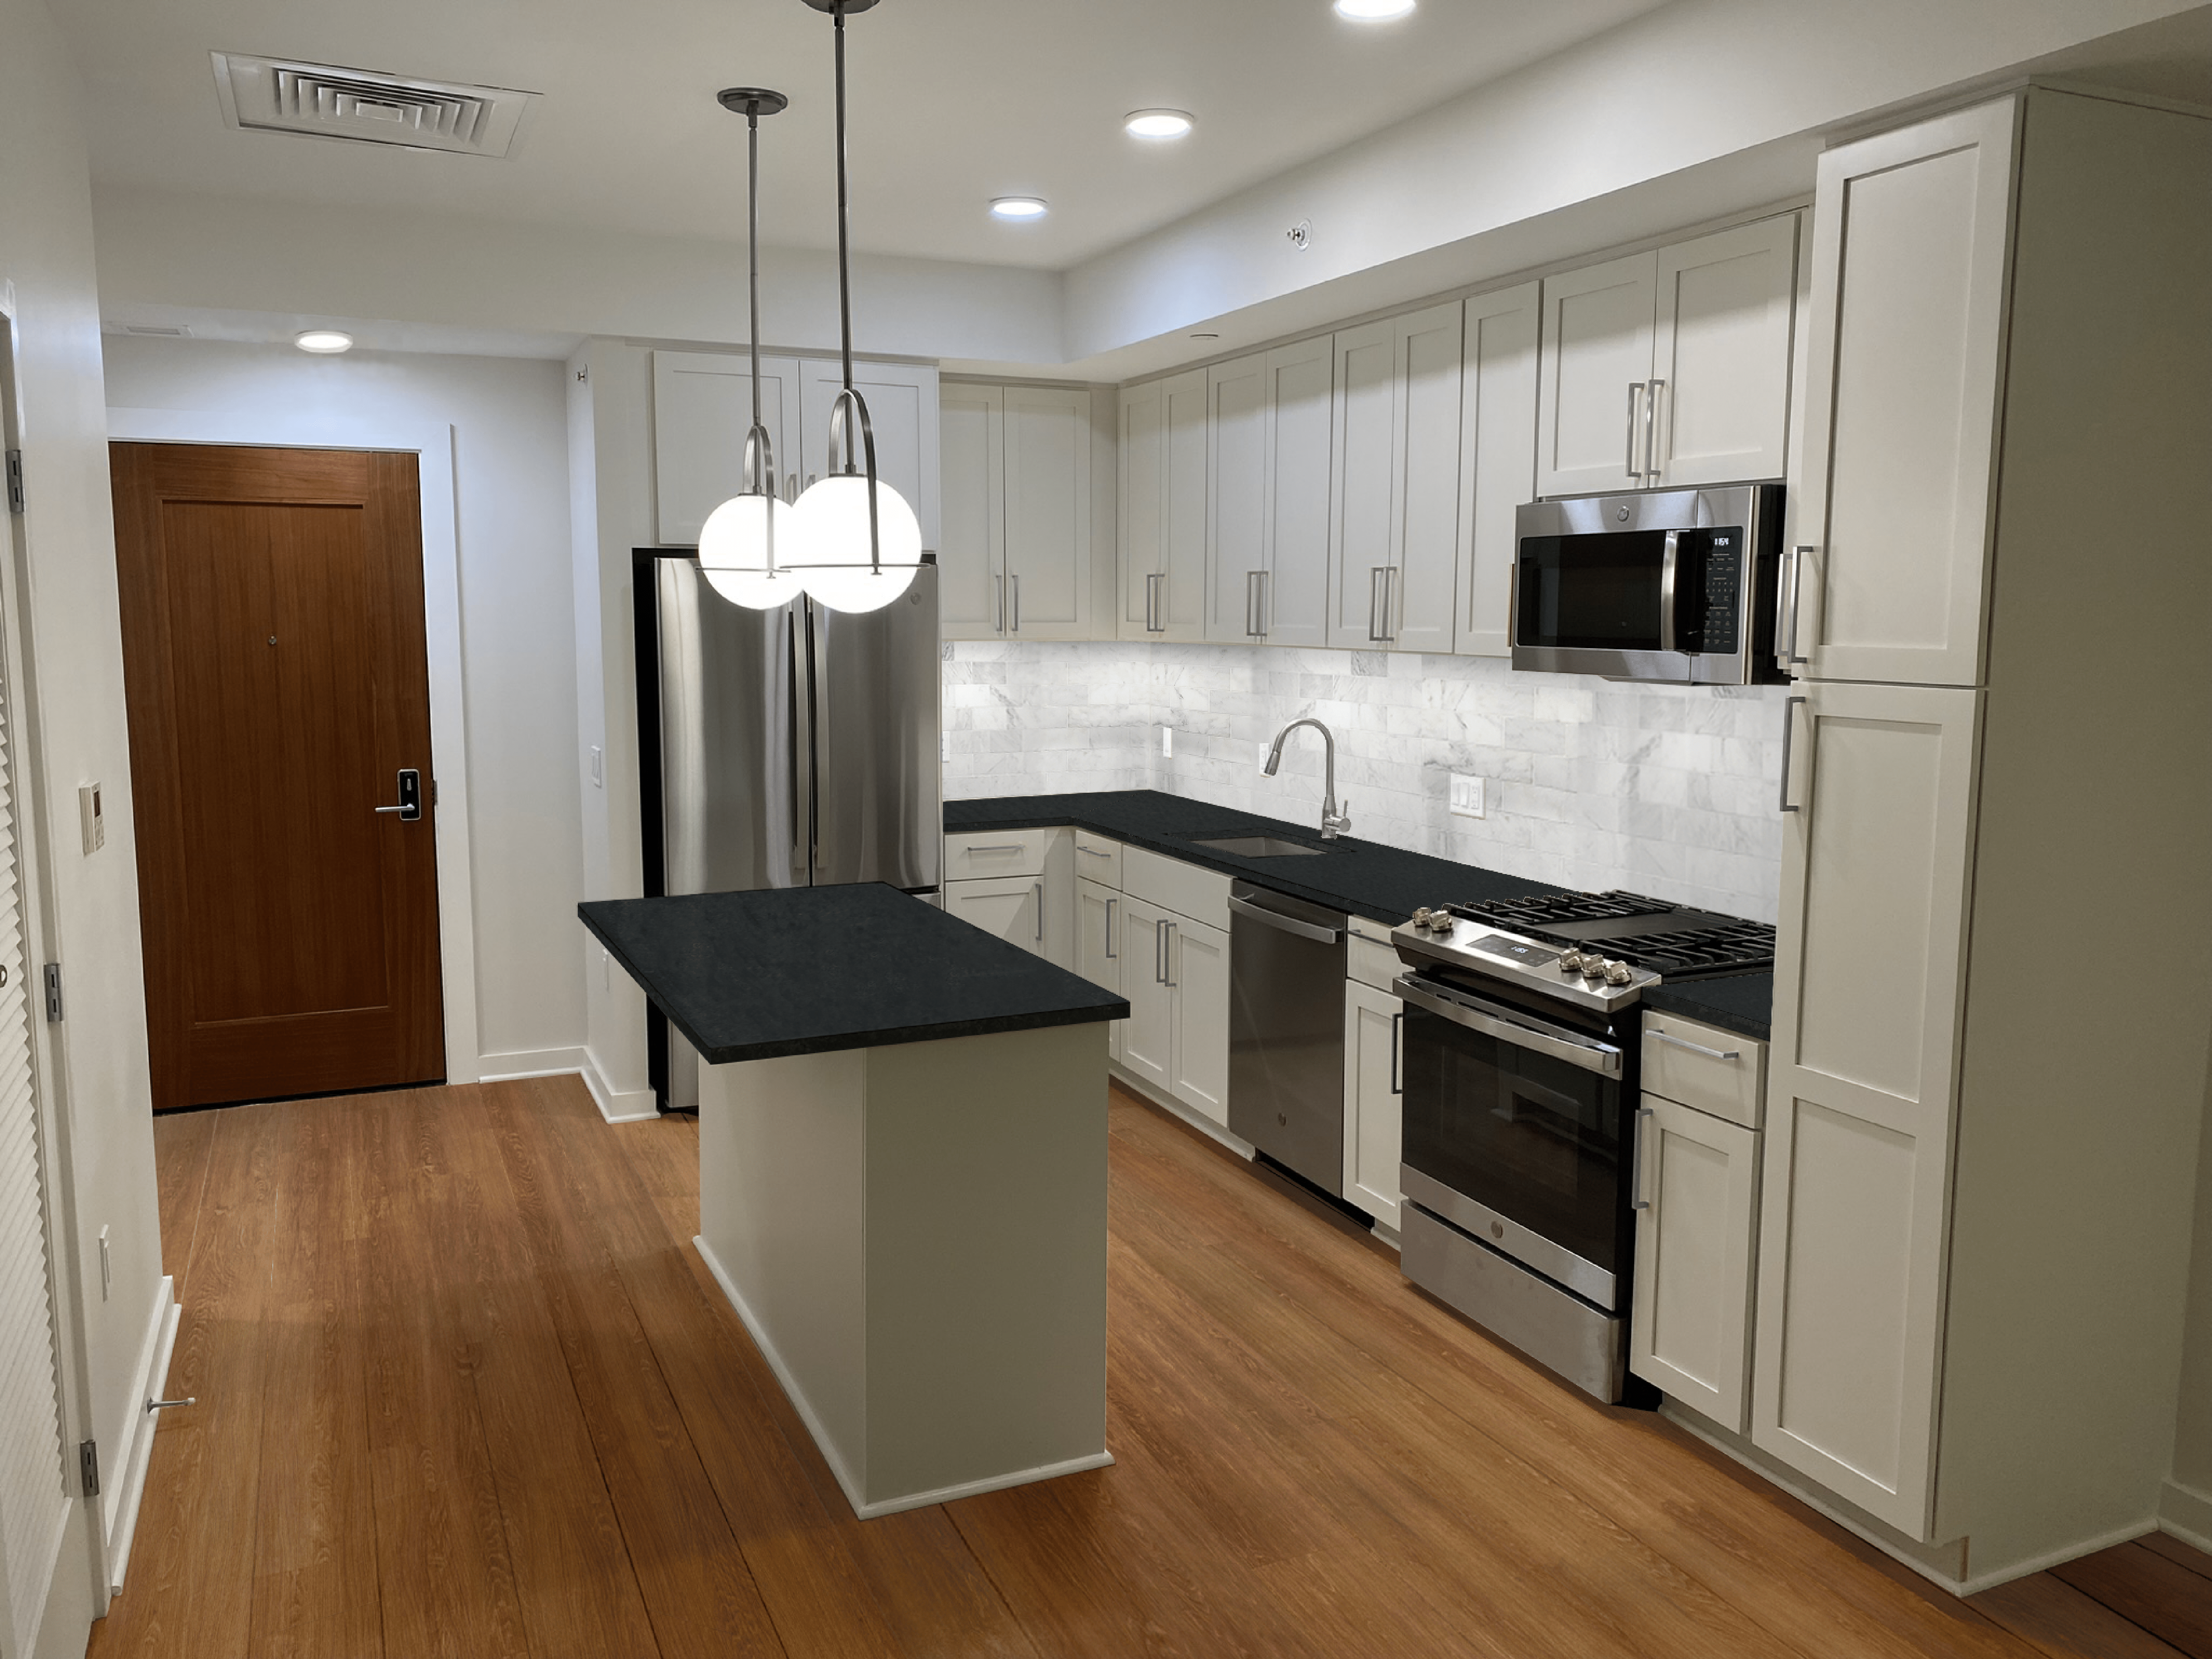 The Milton kitchen with white cabinets and black countertops